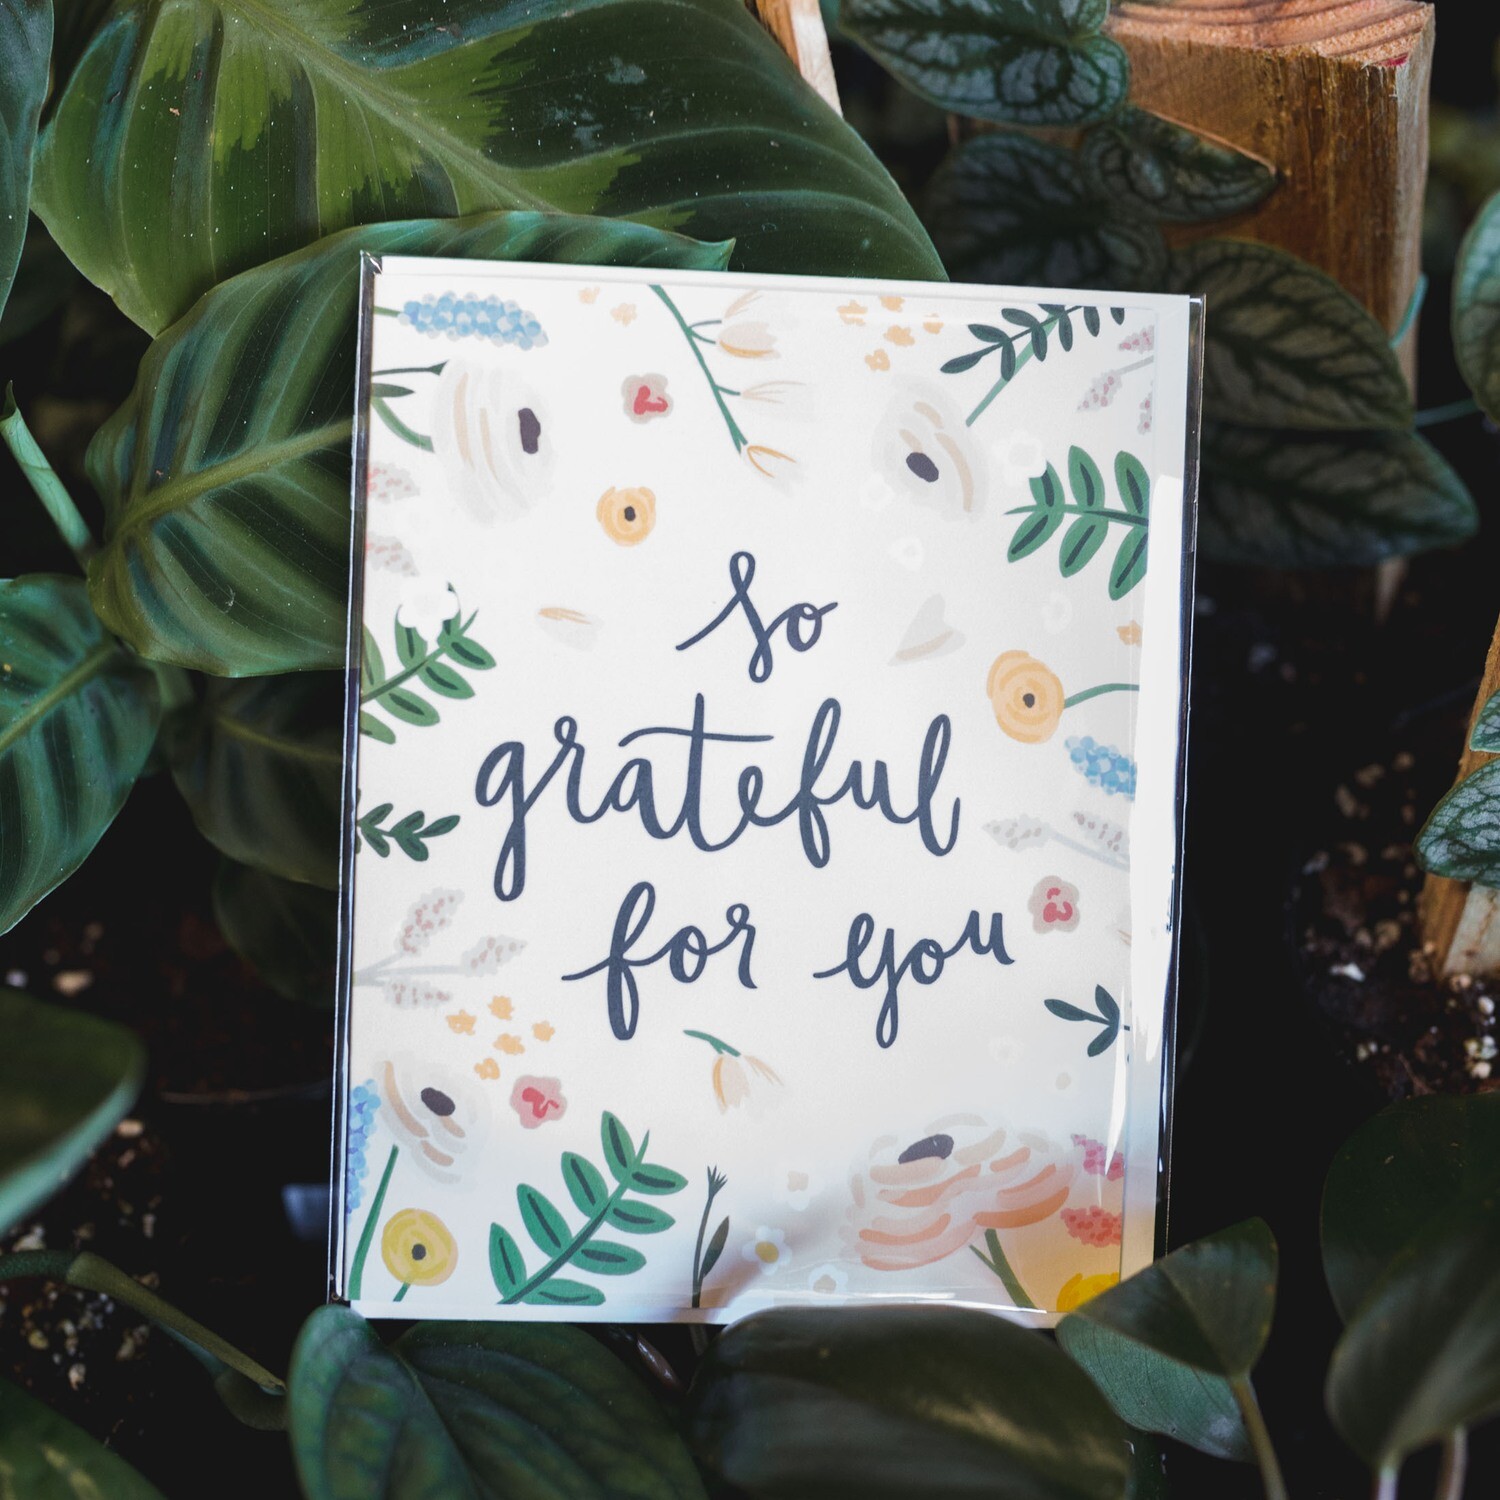 "So Grateful for You" Card